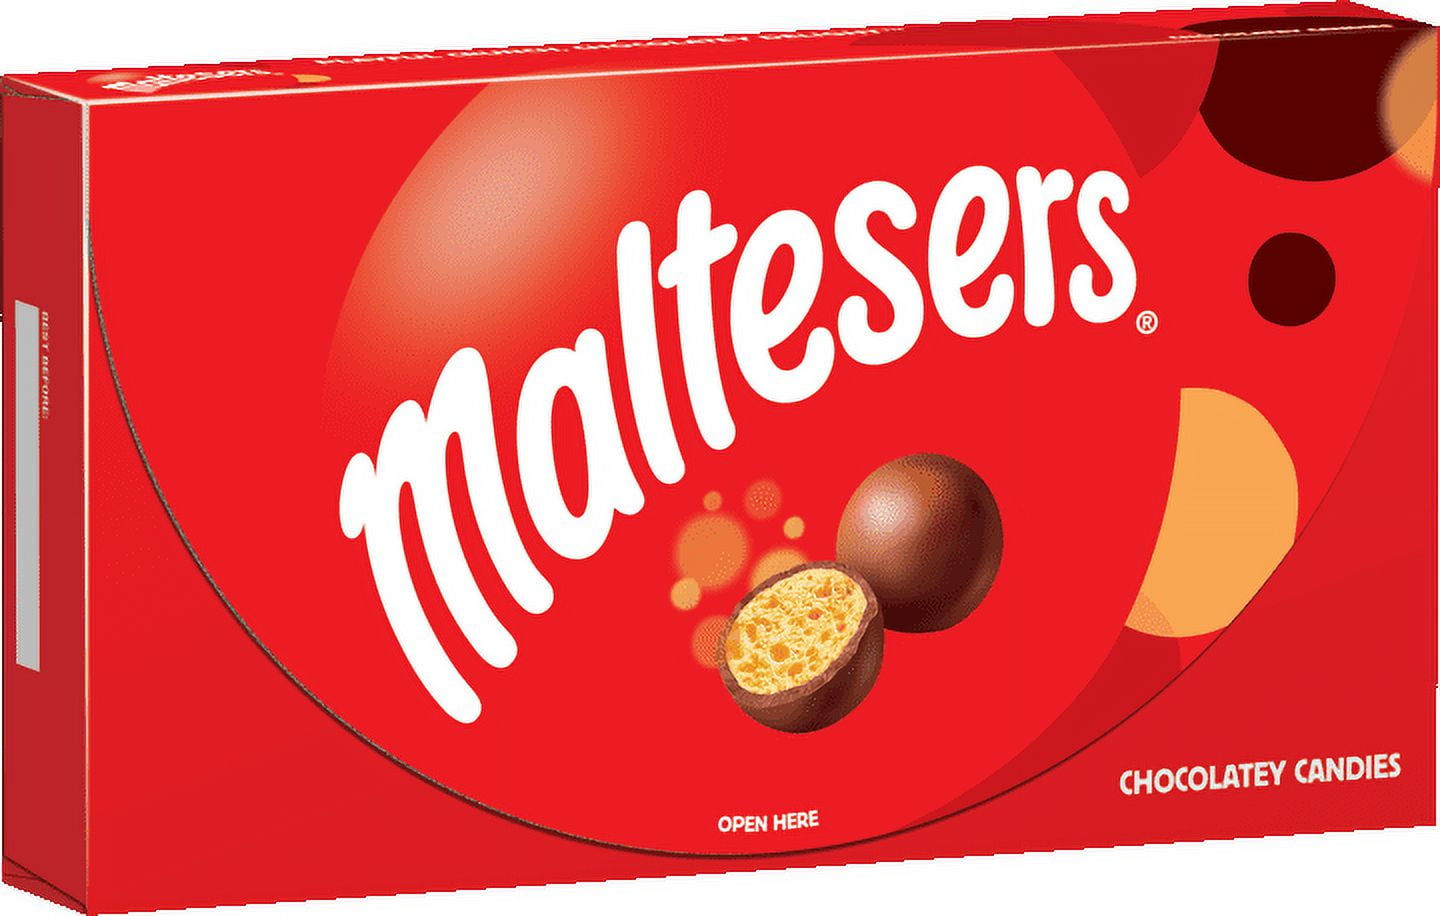 4 X Maltesers Chocolate 100g Each - From Canada - FRESH & DELICIOUS!